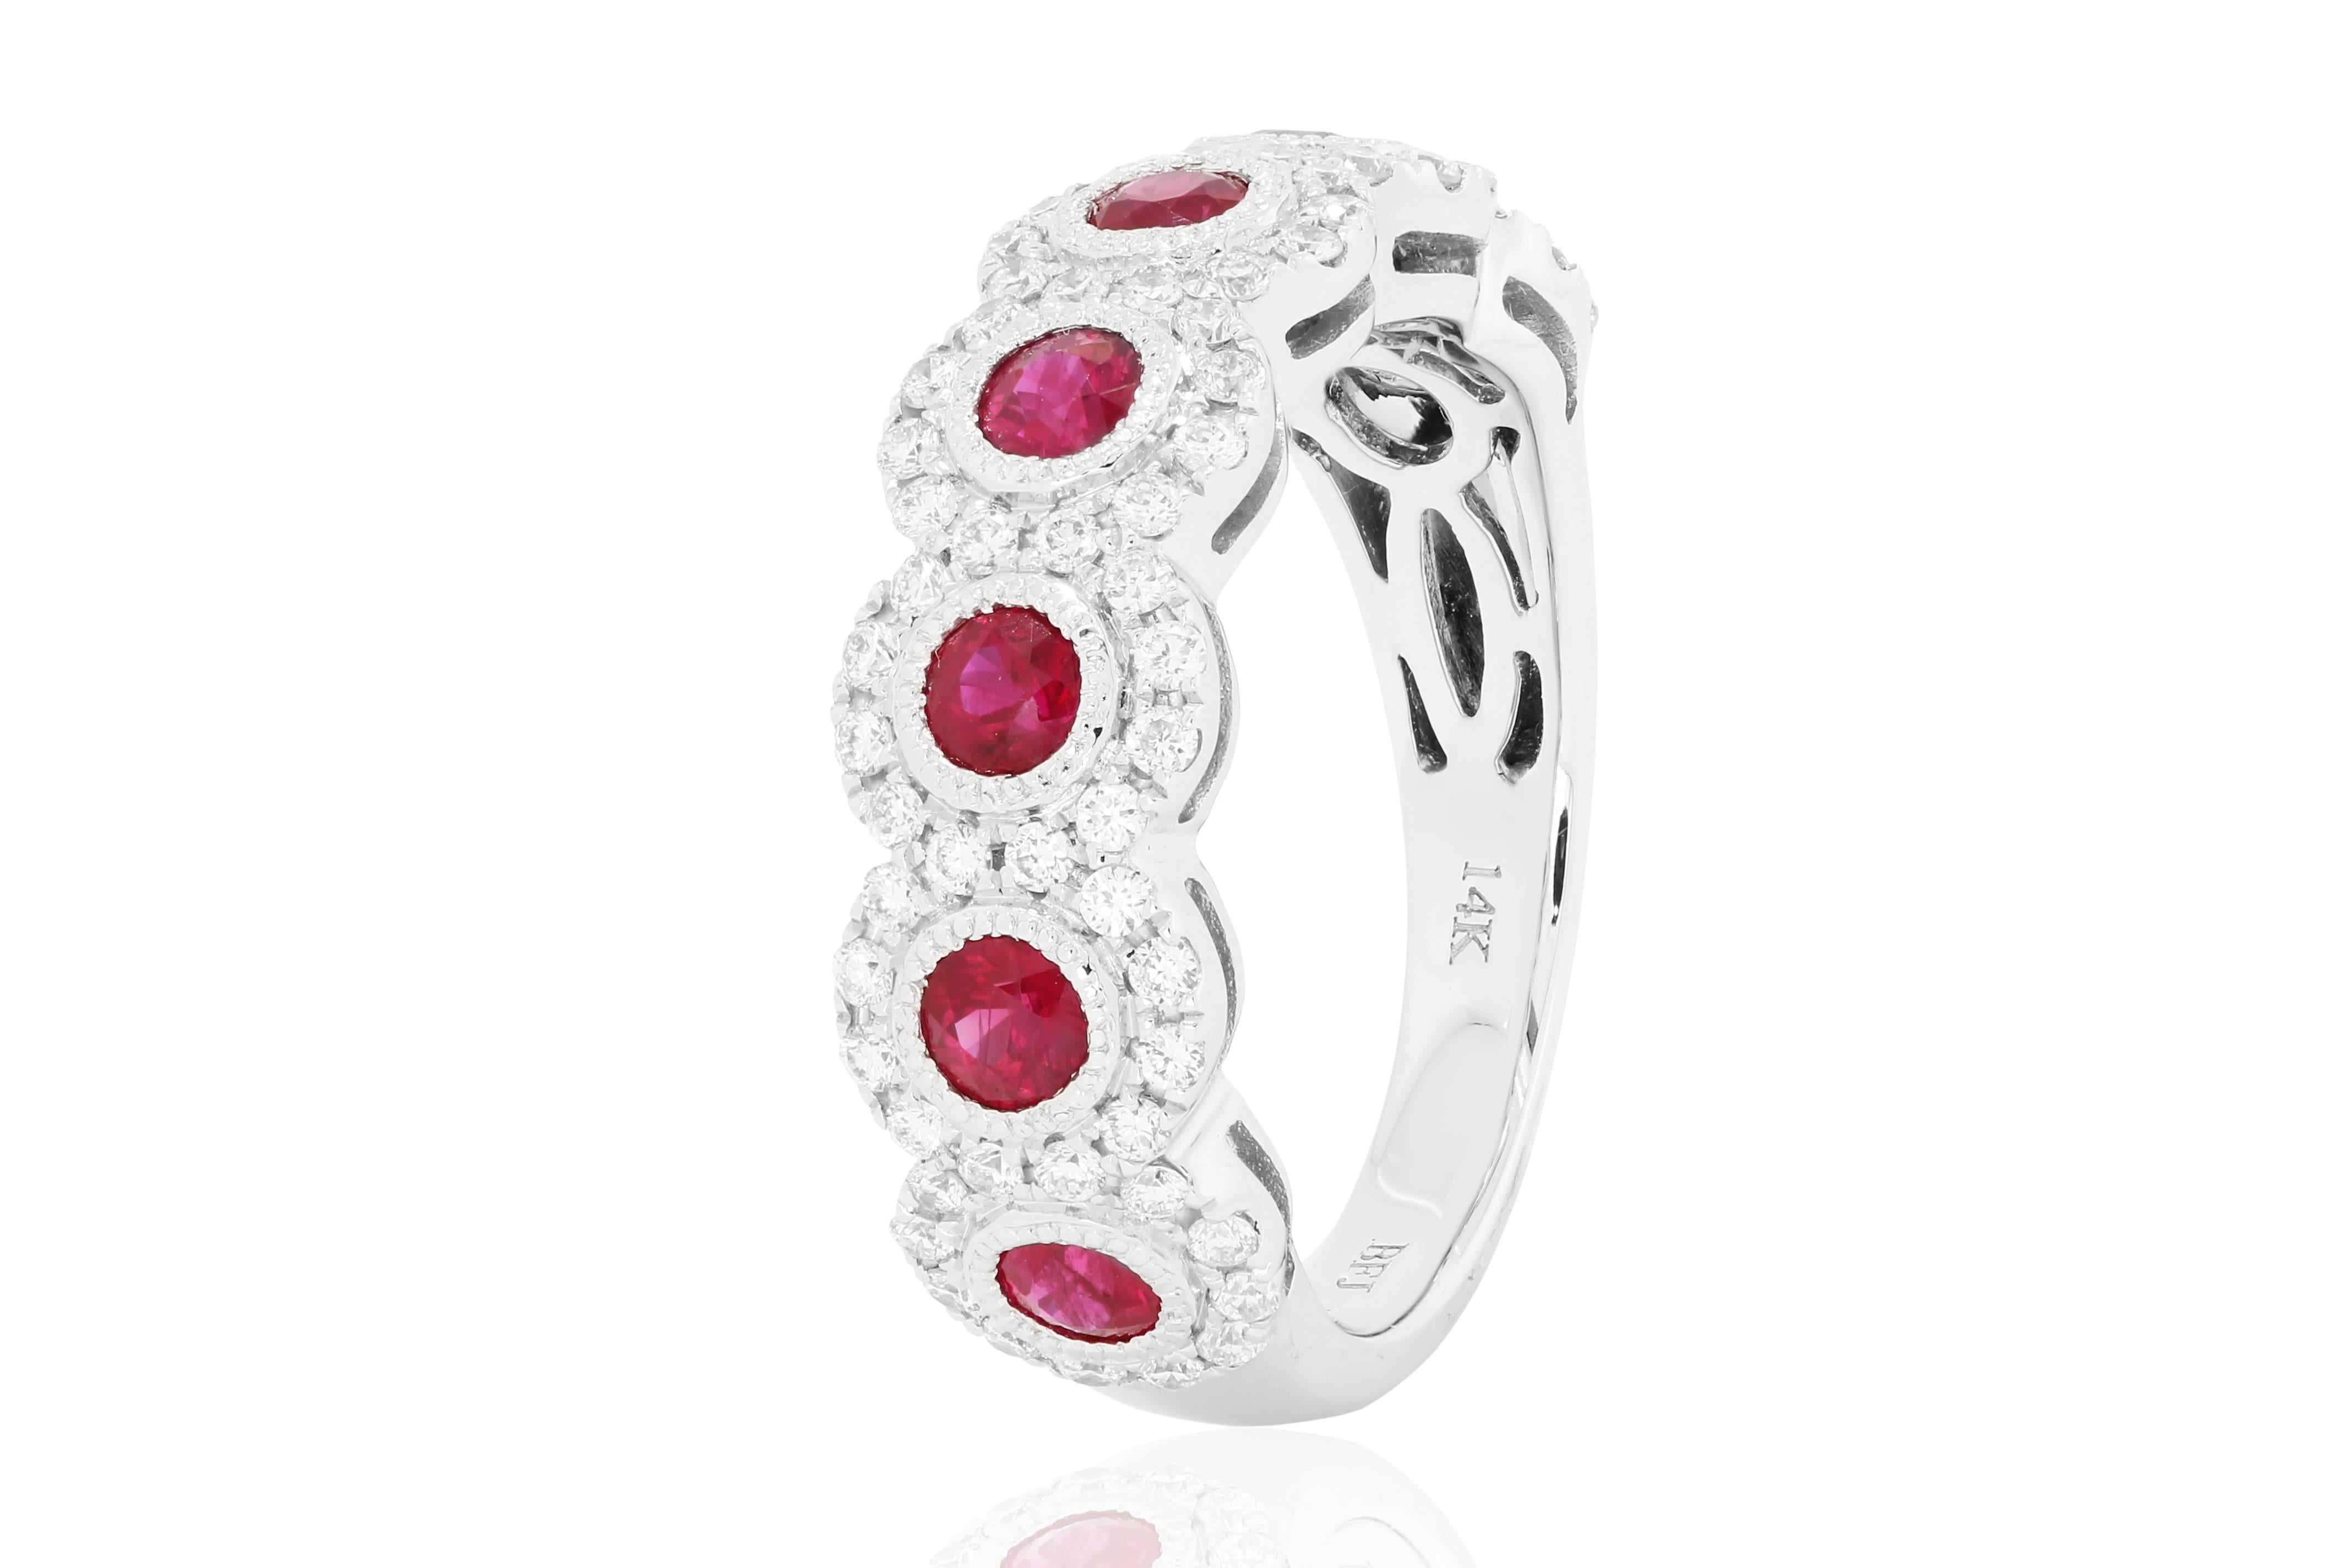 Stunning 7 Ruby Round 0.93 Carat in Bezel Setting with Filigree work encircled in a Halo of White Diamond Round 0.50 Carat in 14K White Gold Band Cocktail Fashion Ring.